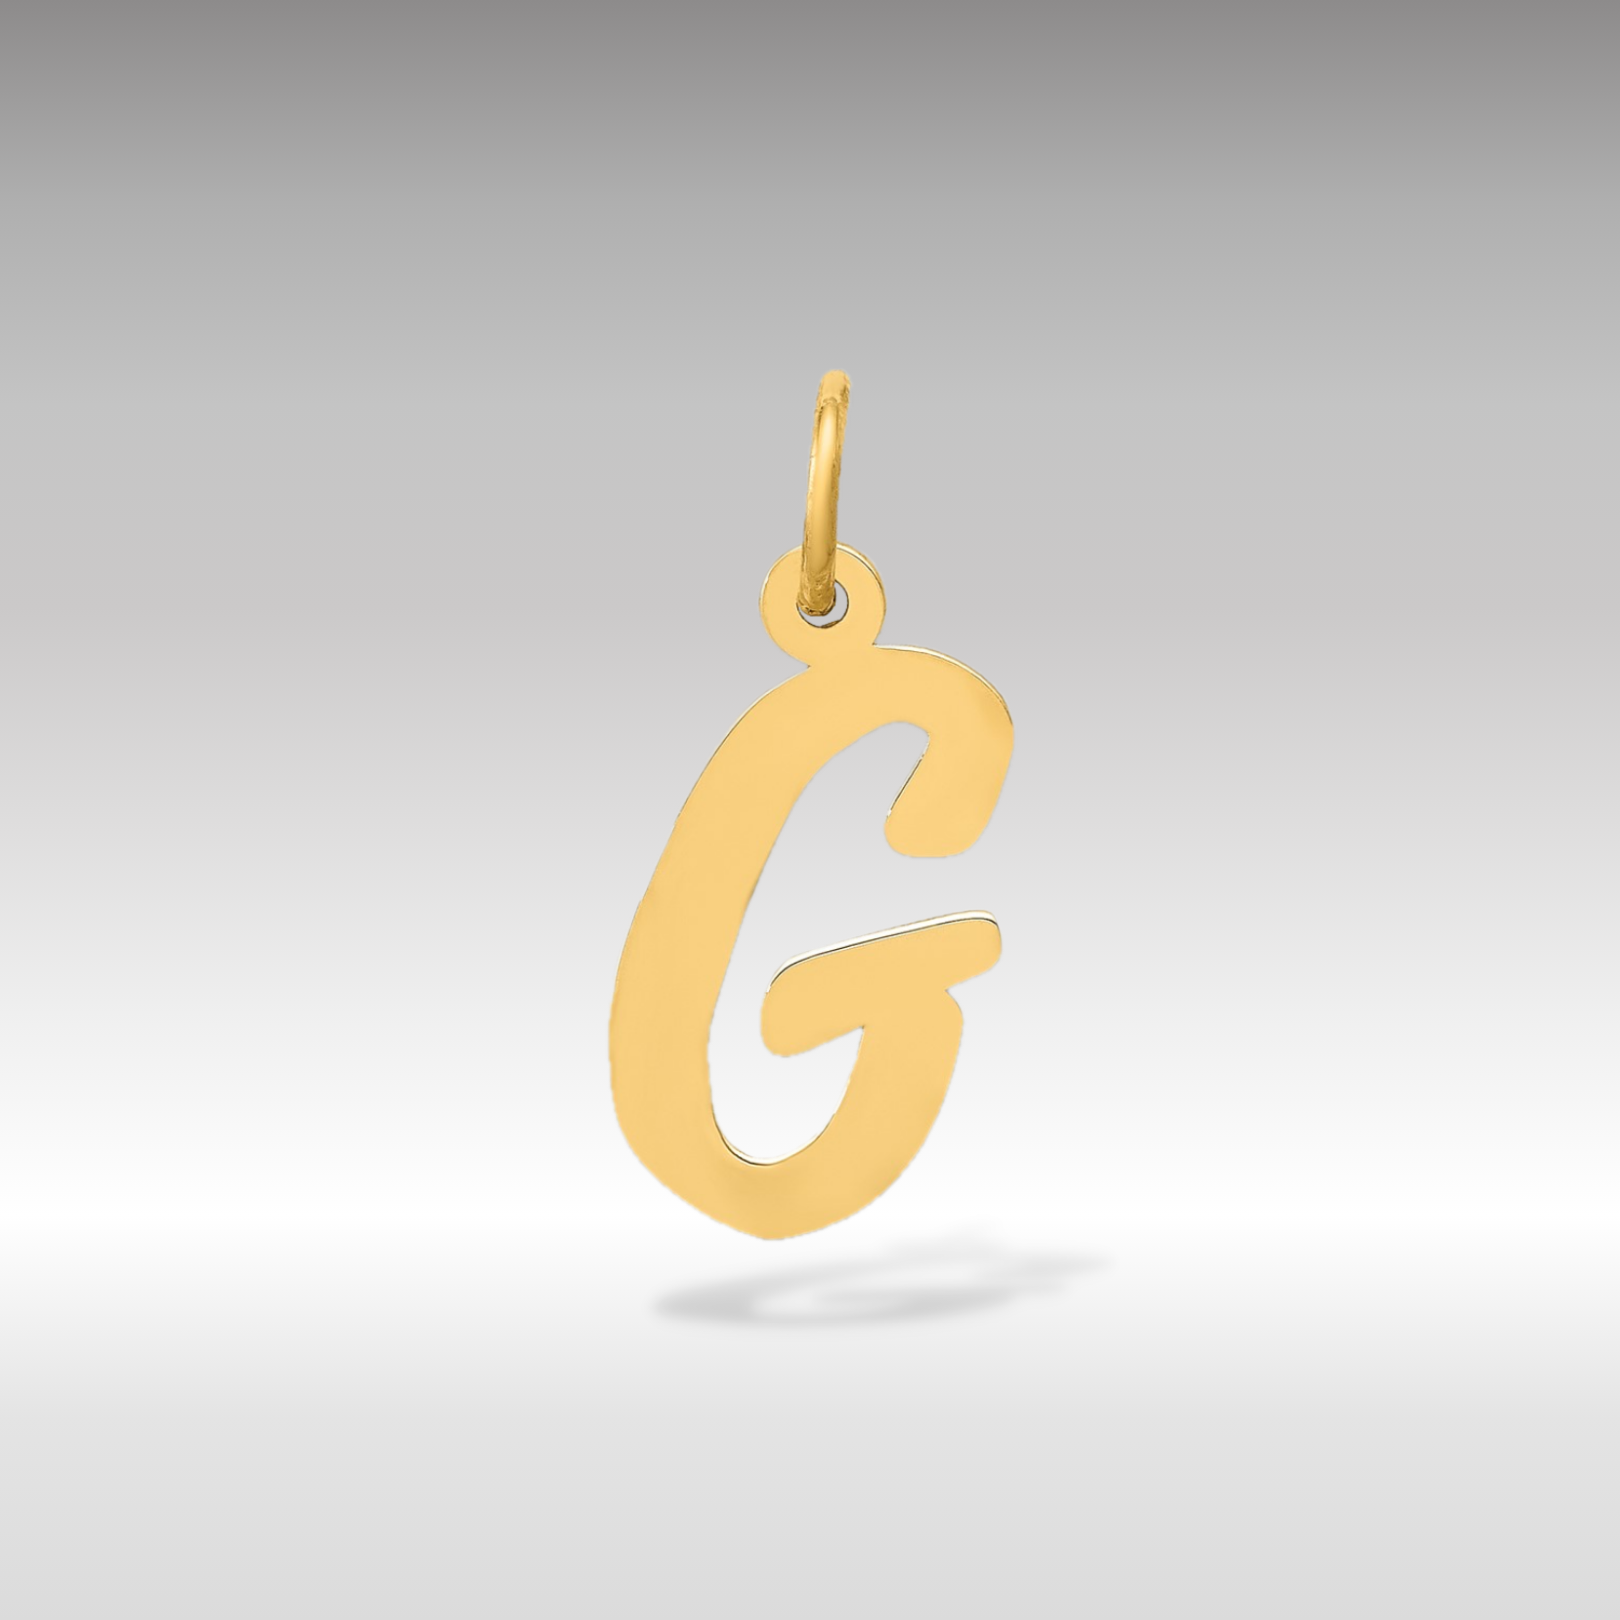 14K Gold Script Letter "G" Initial Pendant - Charlie & Co. Jewelry